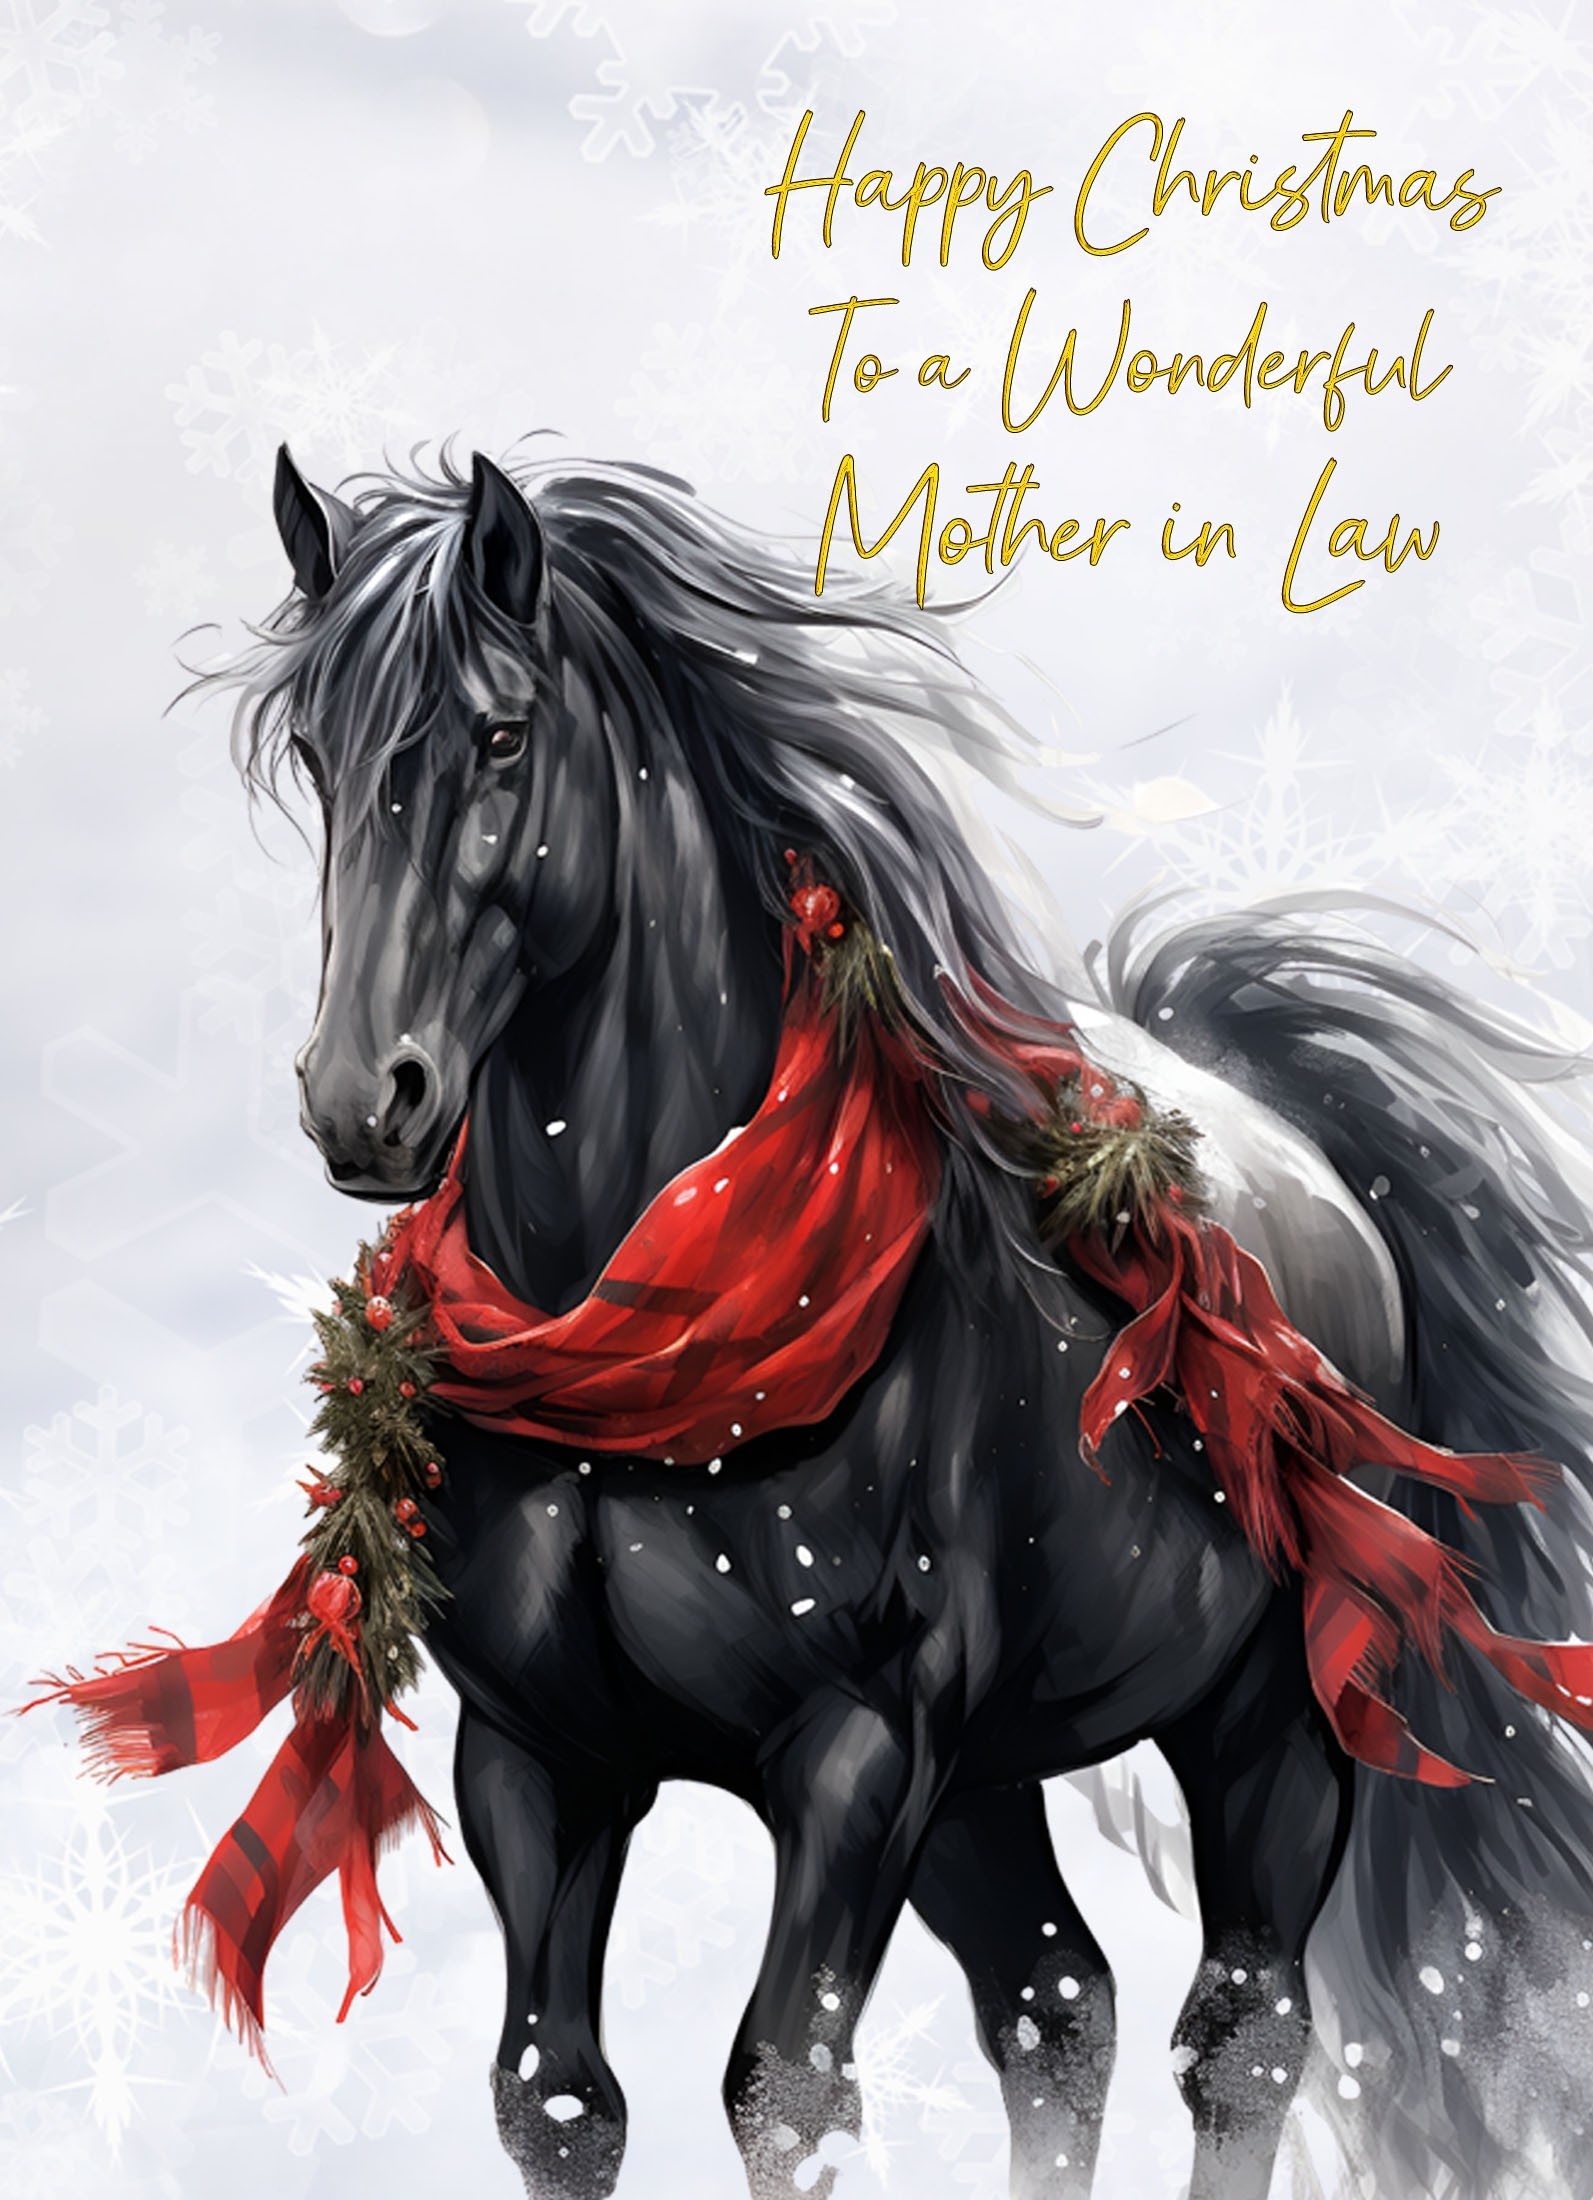 Christmas Card For Mother in Law (Horse Art Black)